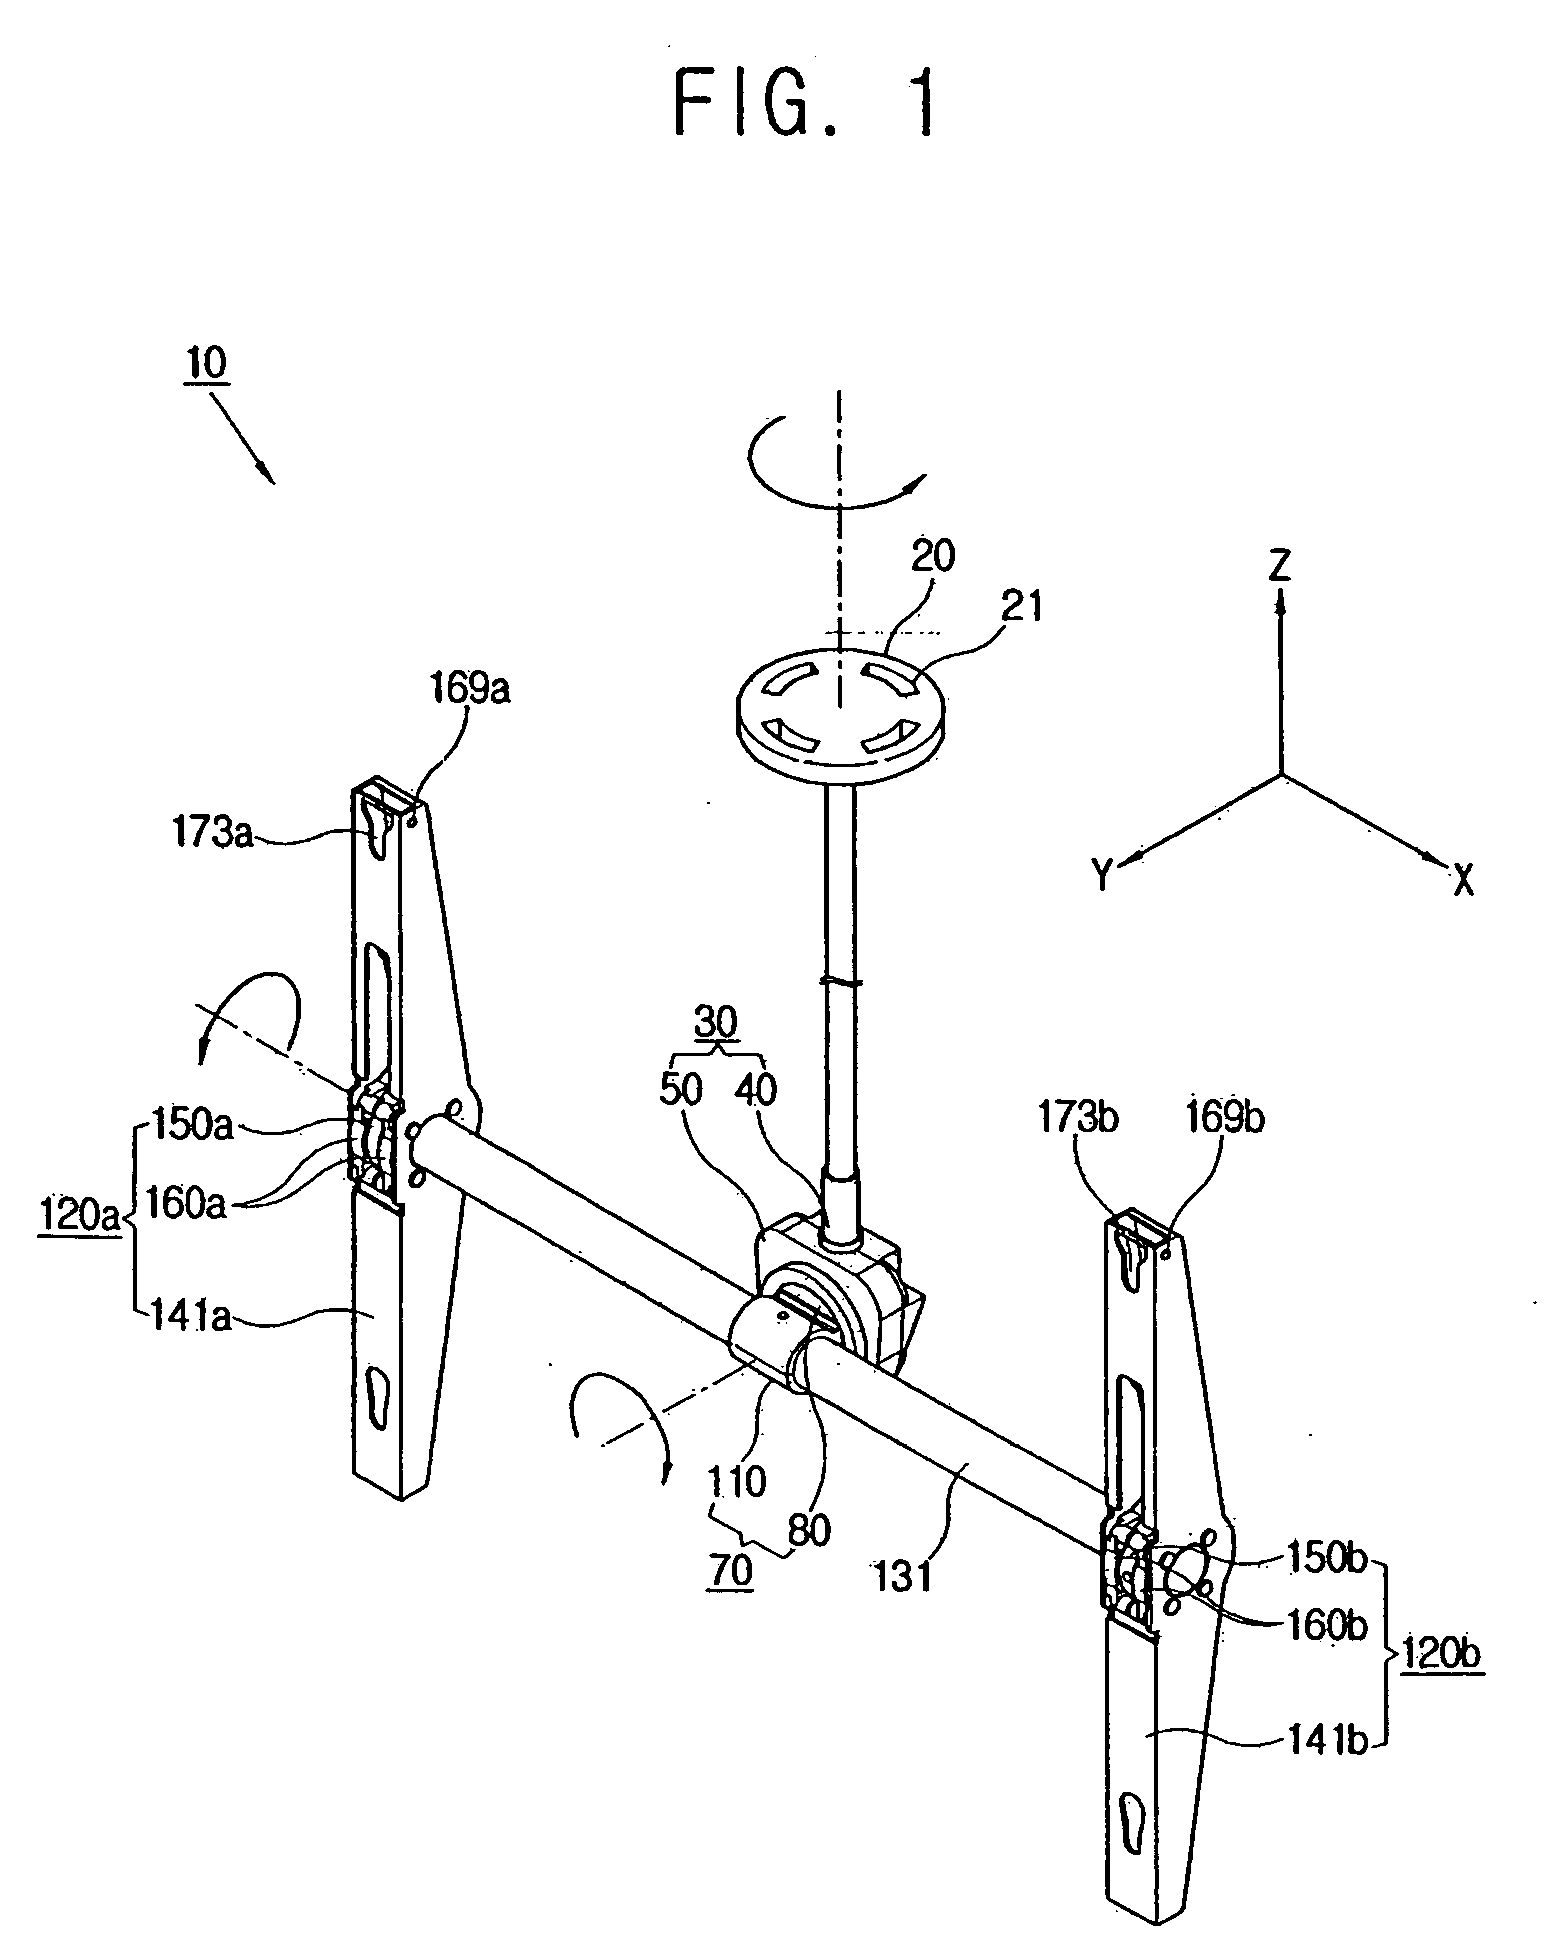 Apparatus to support a display device